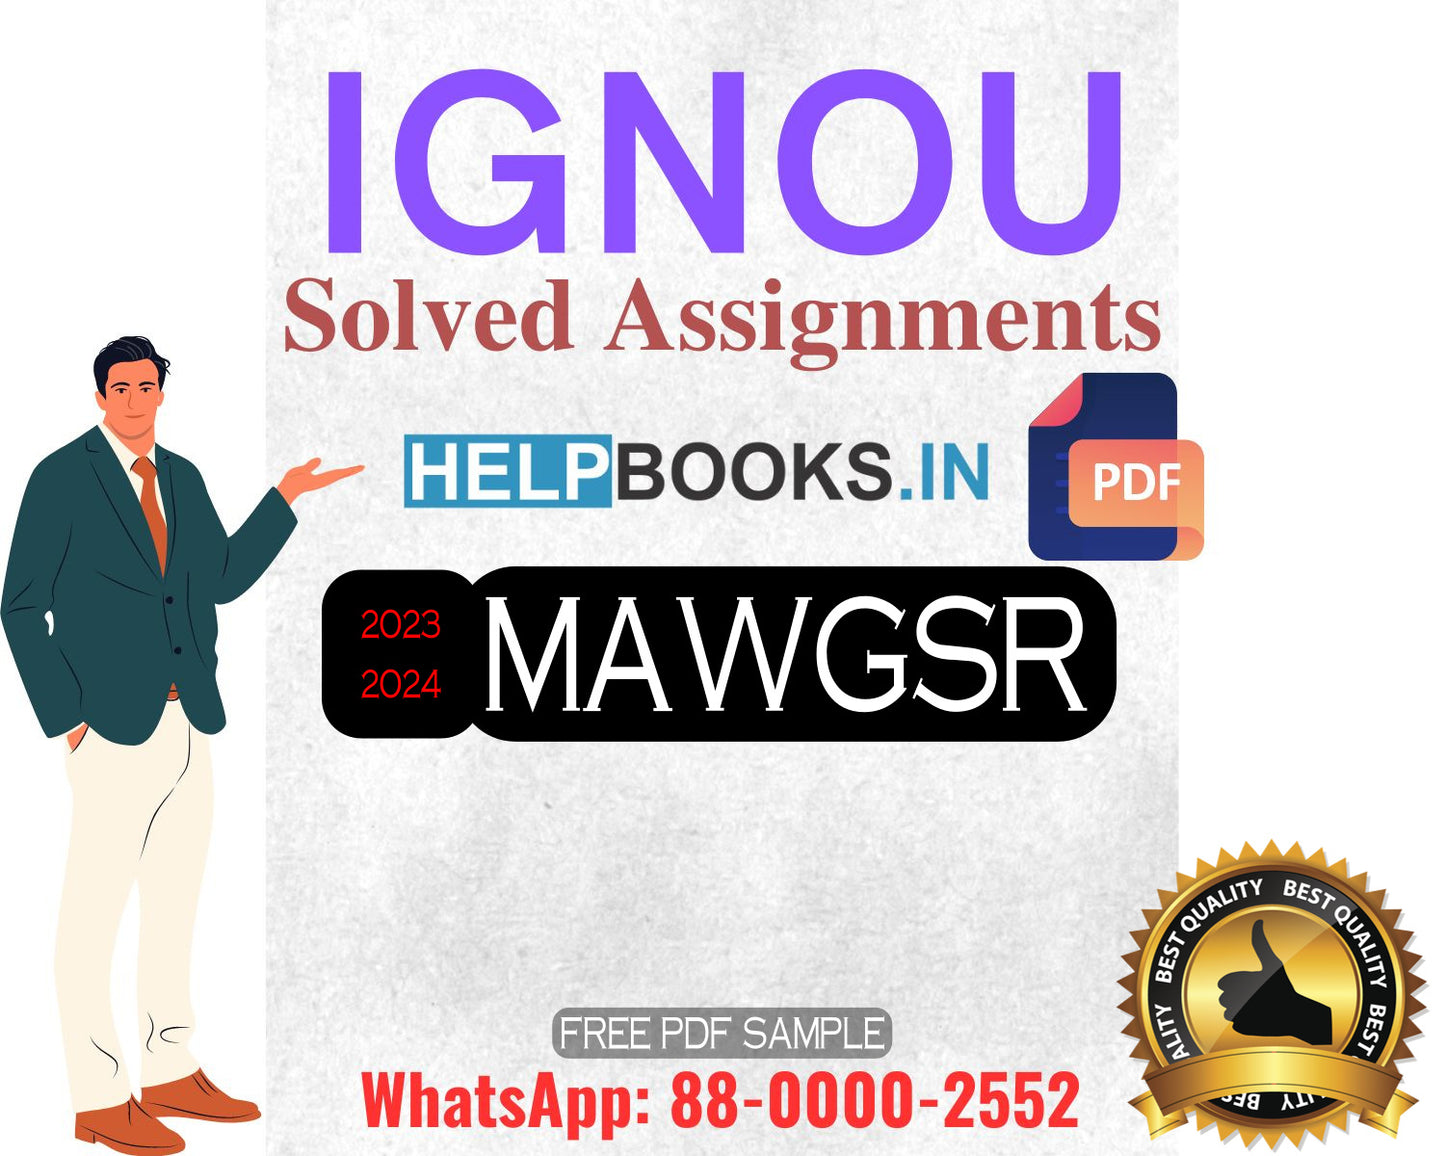 IGNOU Master's Degree Programme Latest IGNOU Solved Assignment 2023-24 : MAWGSR Master of Arts Women and Gender Studies Solved Assignments